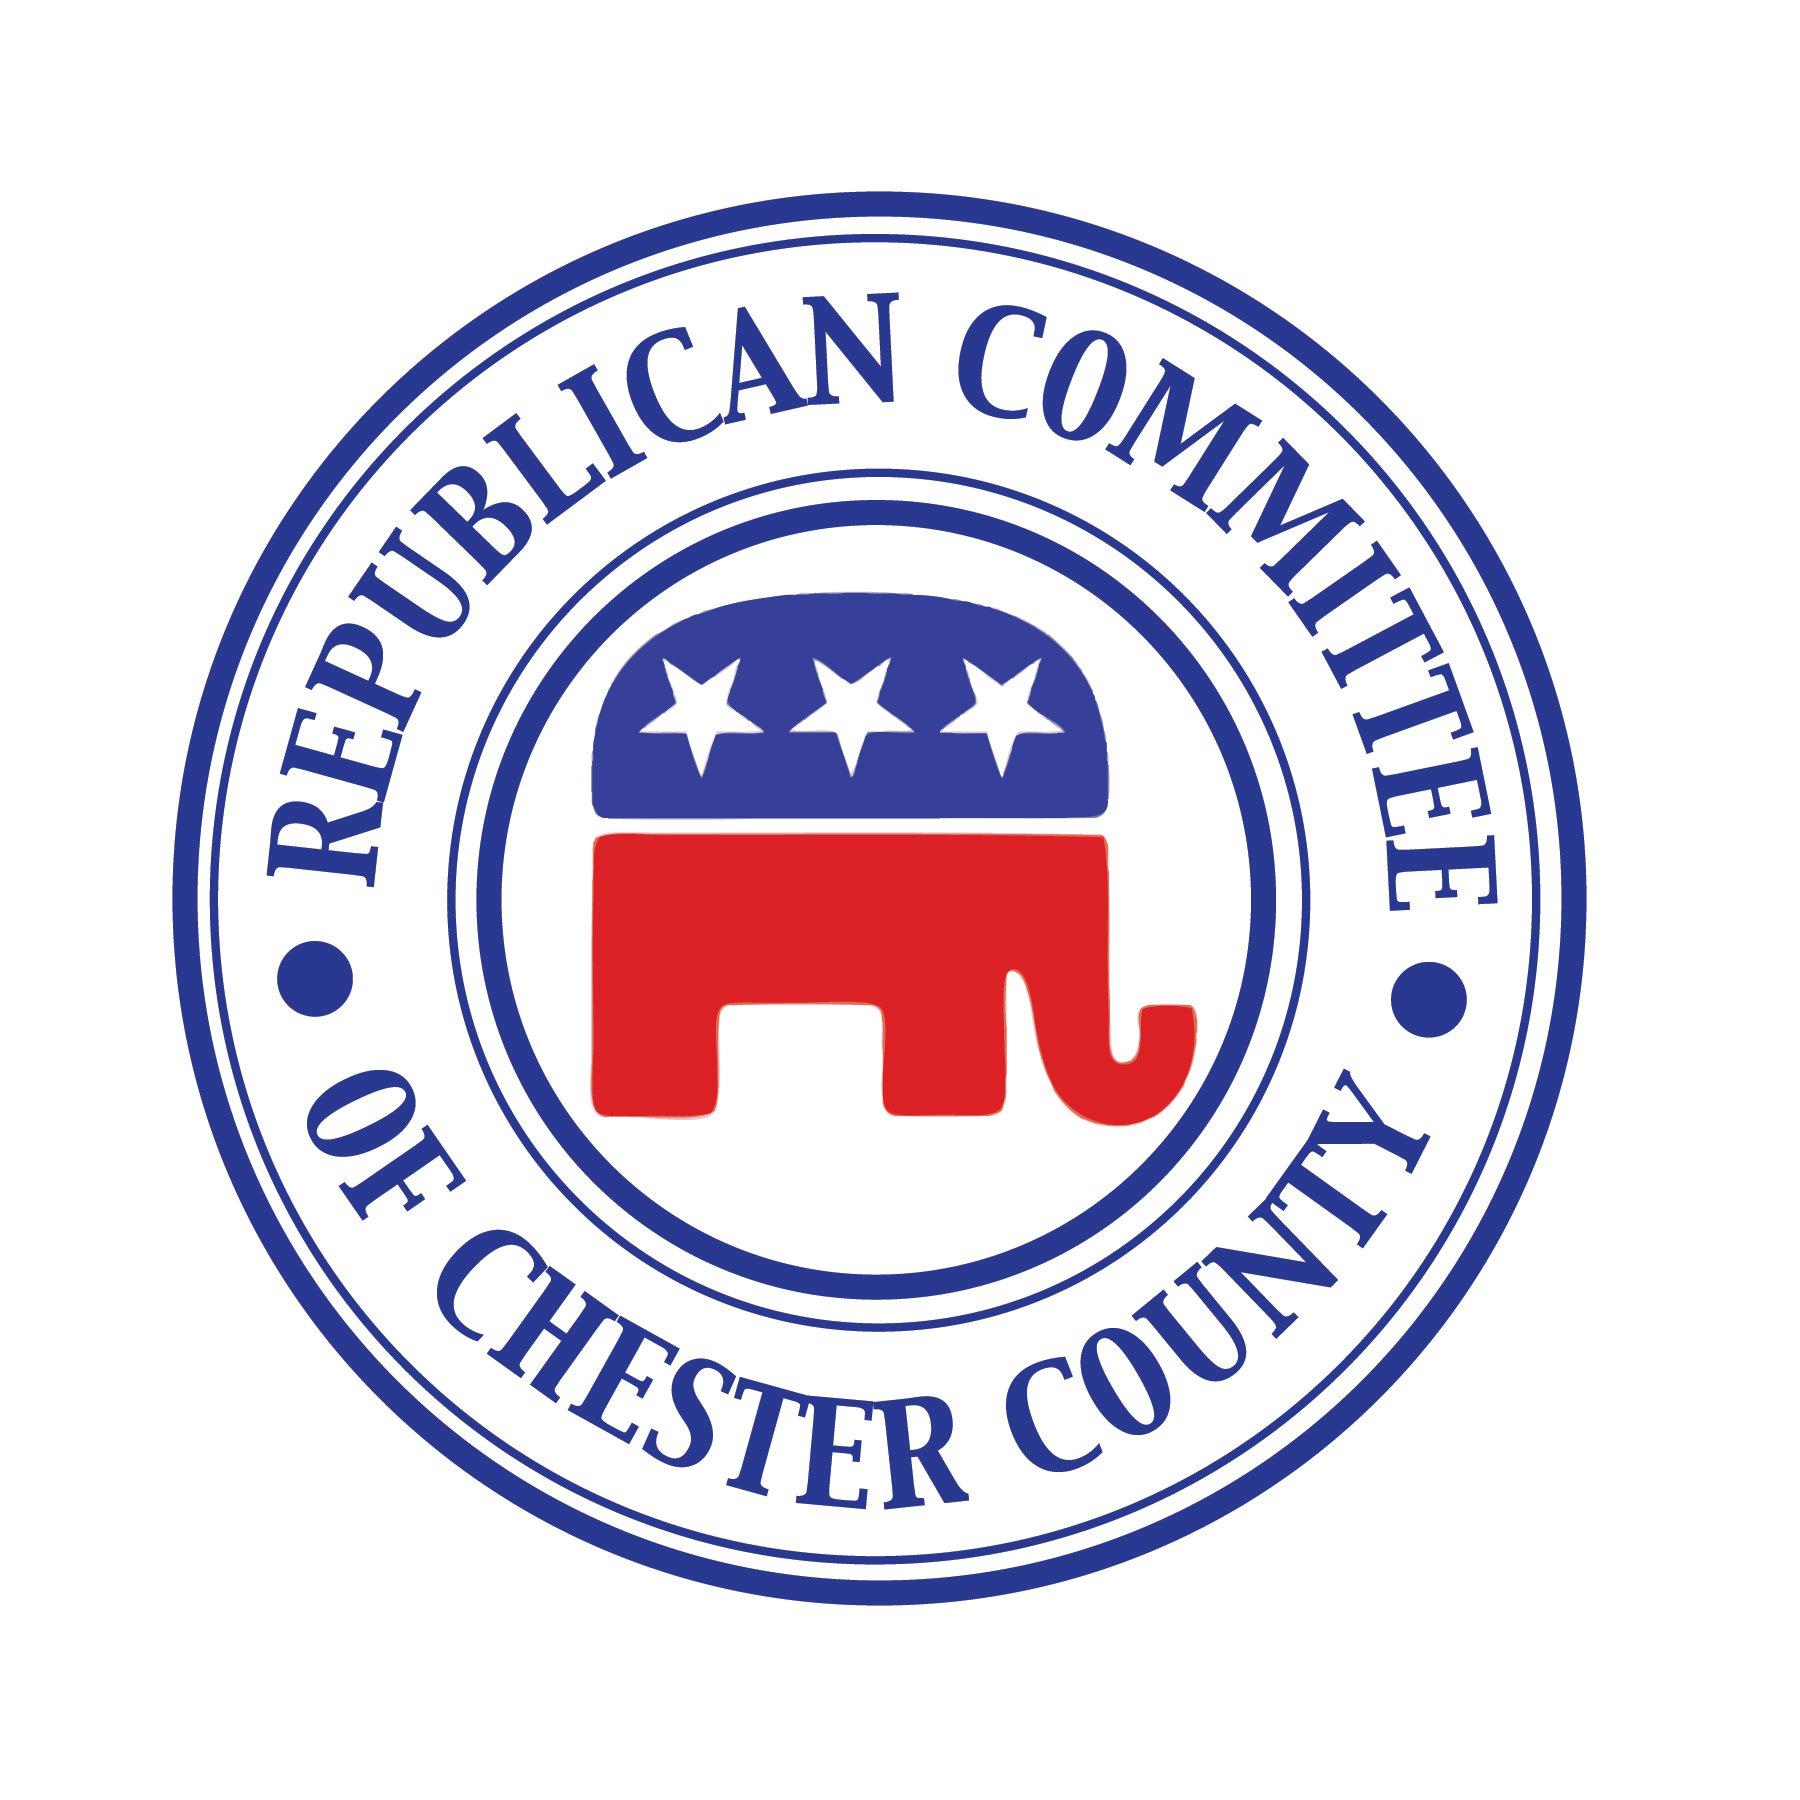 republican-committee-of-chester-county.jpeg